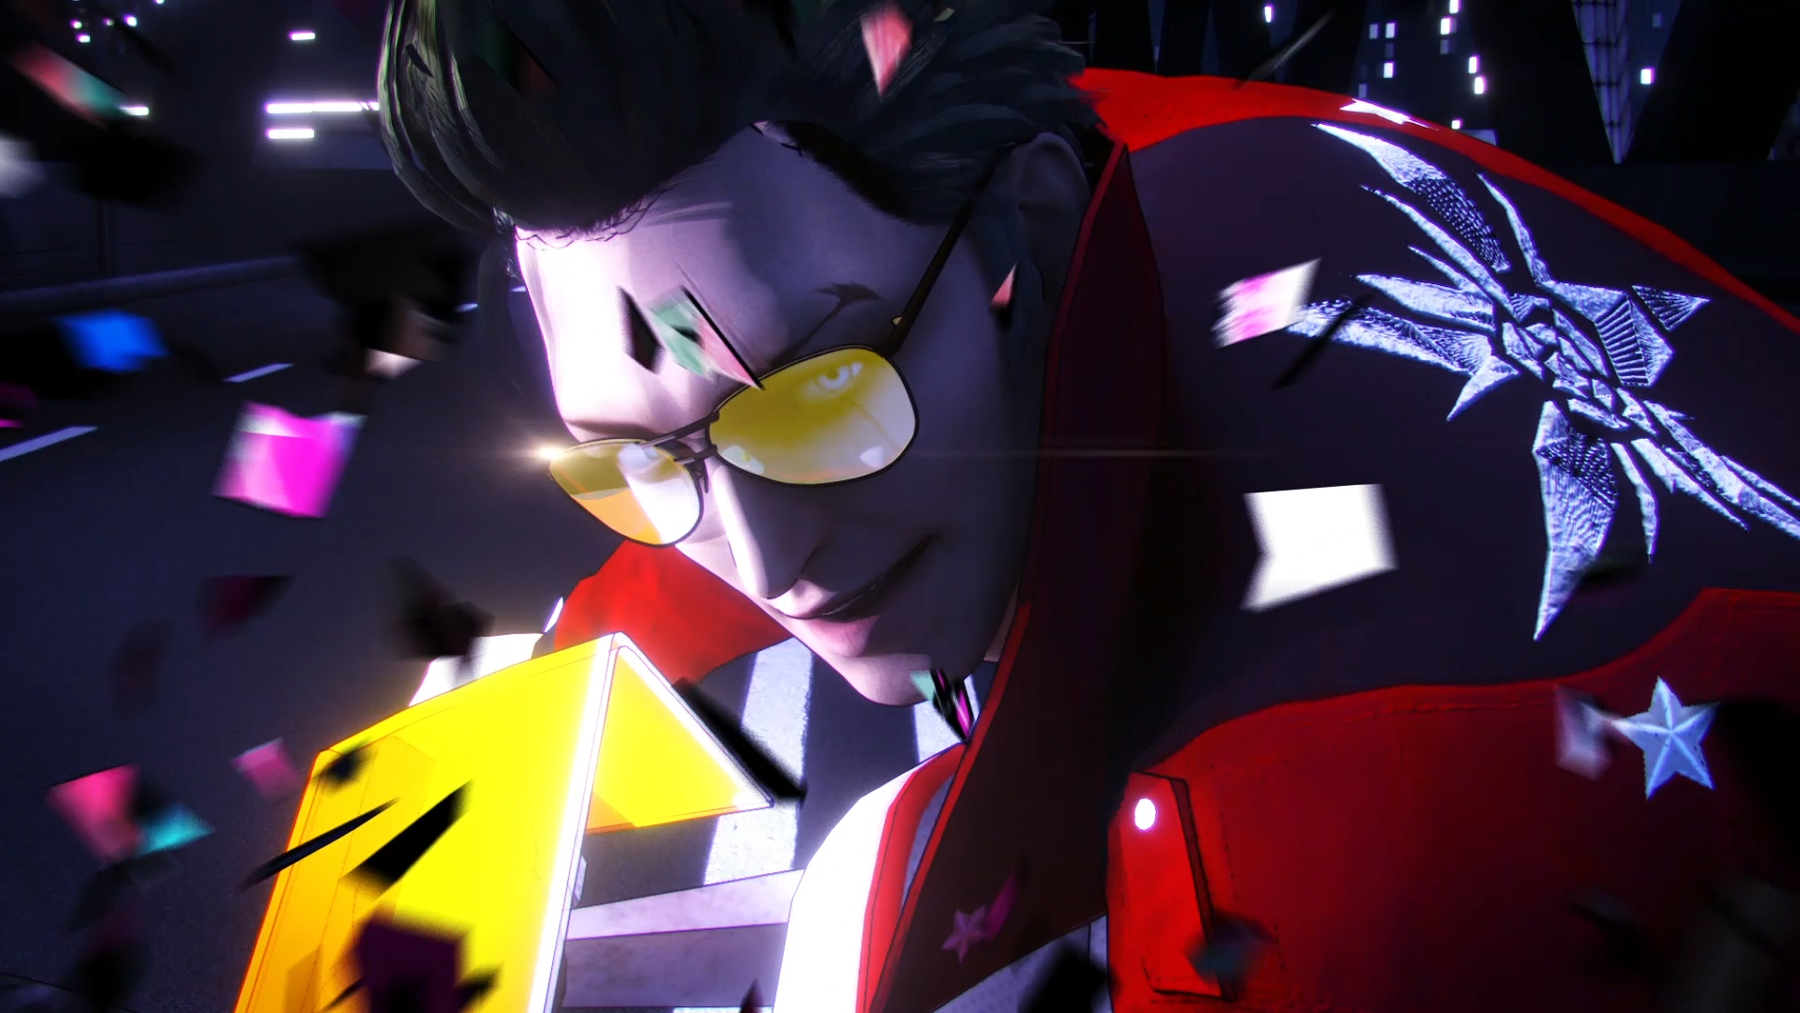 Switch Exclusive No More Heroes 3 Has Been Delayed To 2021 Wilson S Media - roblox tower heroes spectre music